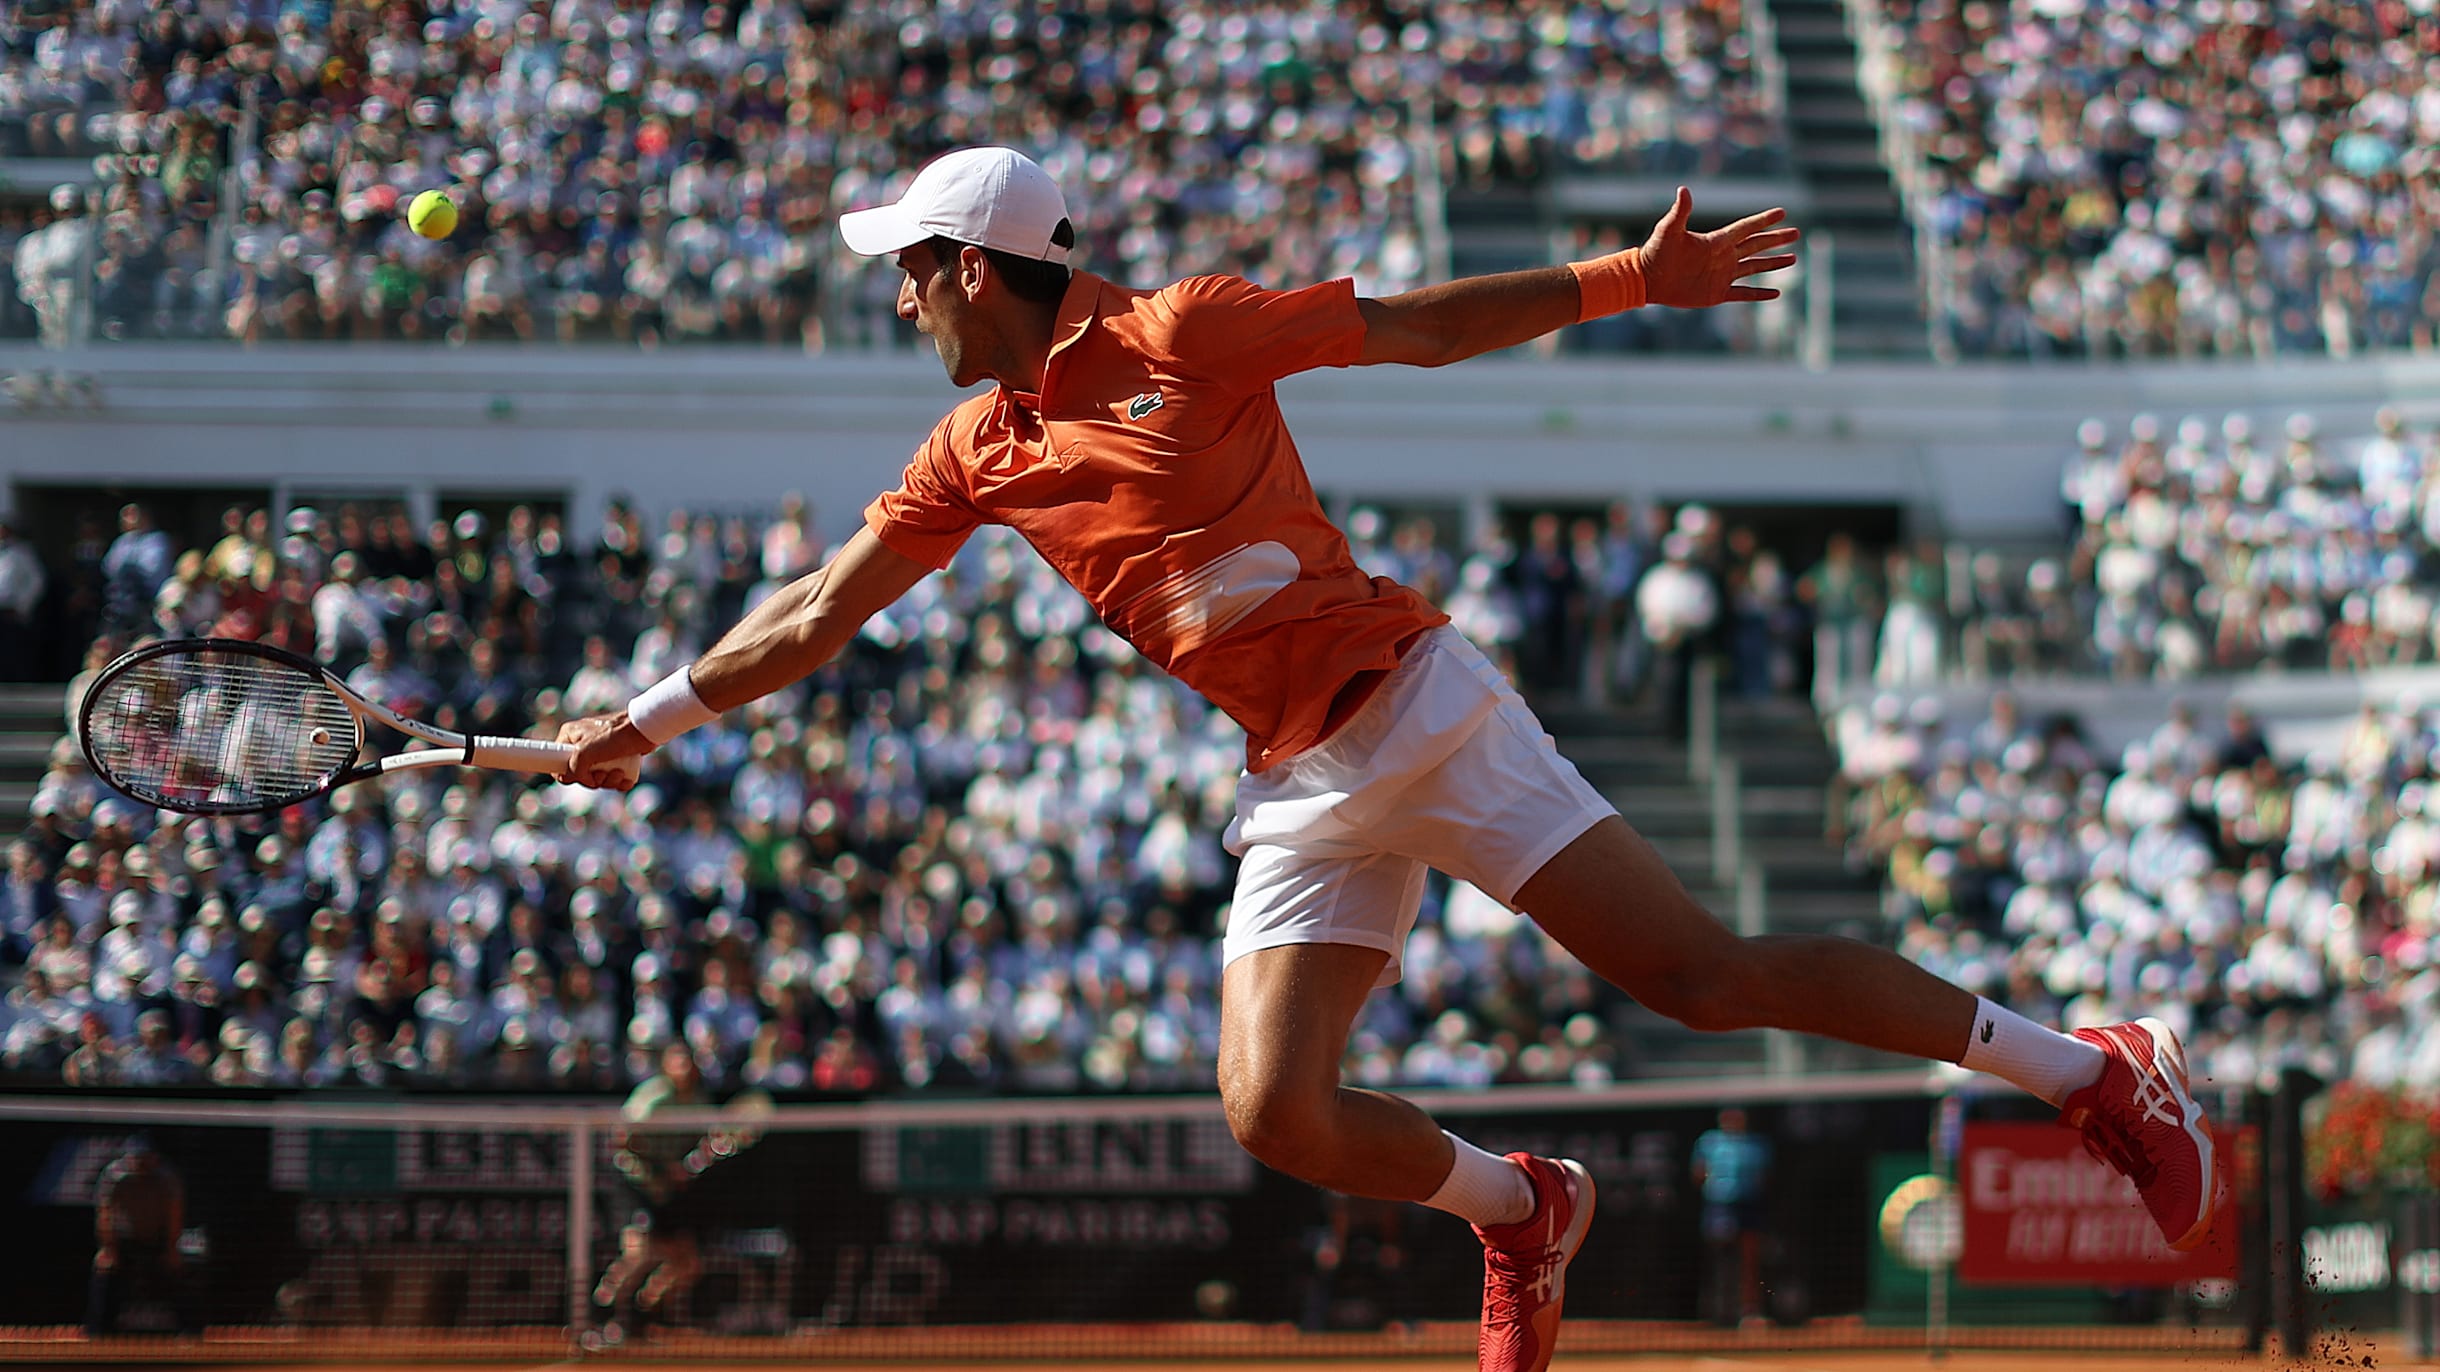 French Open 2022 Watch live streaming and telecast in India